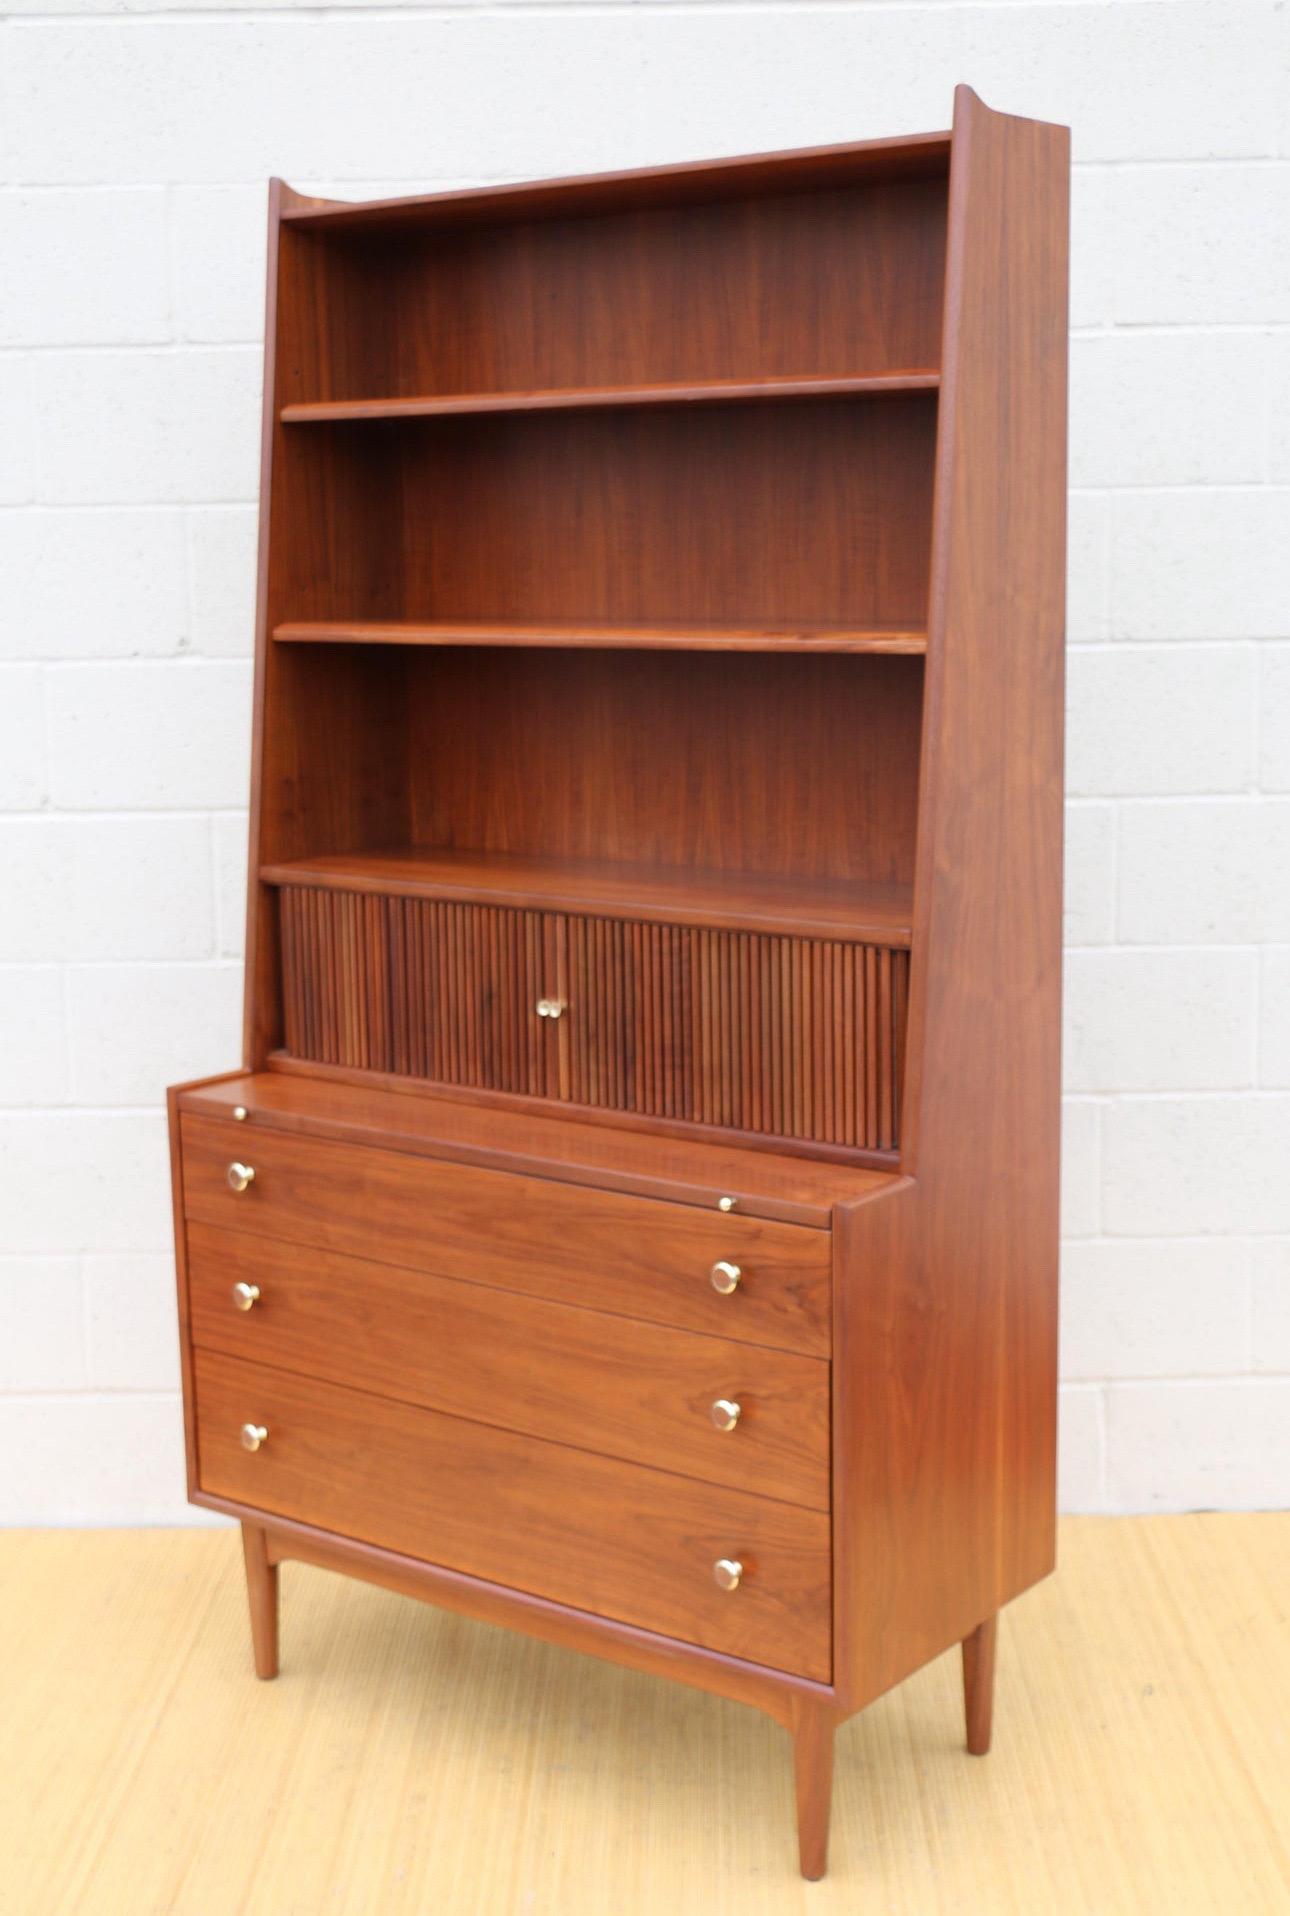 Wonderful vintage Mid Century Modern secretary desk designed by Drexel group, it is marked inside the drawer and in the back too. This iconic desk is made of walnut wood and brass handles, just a good quality desk. On the other hand, this amazing